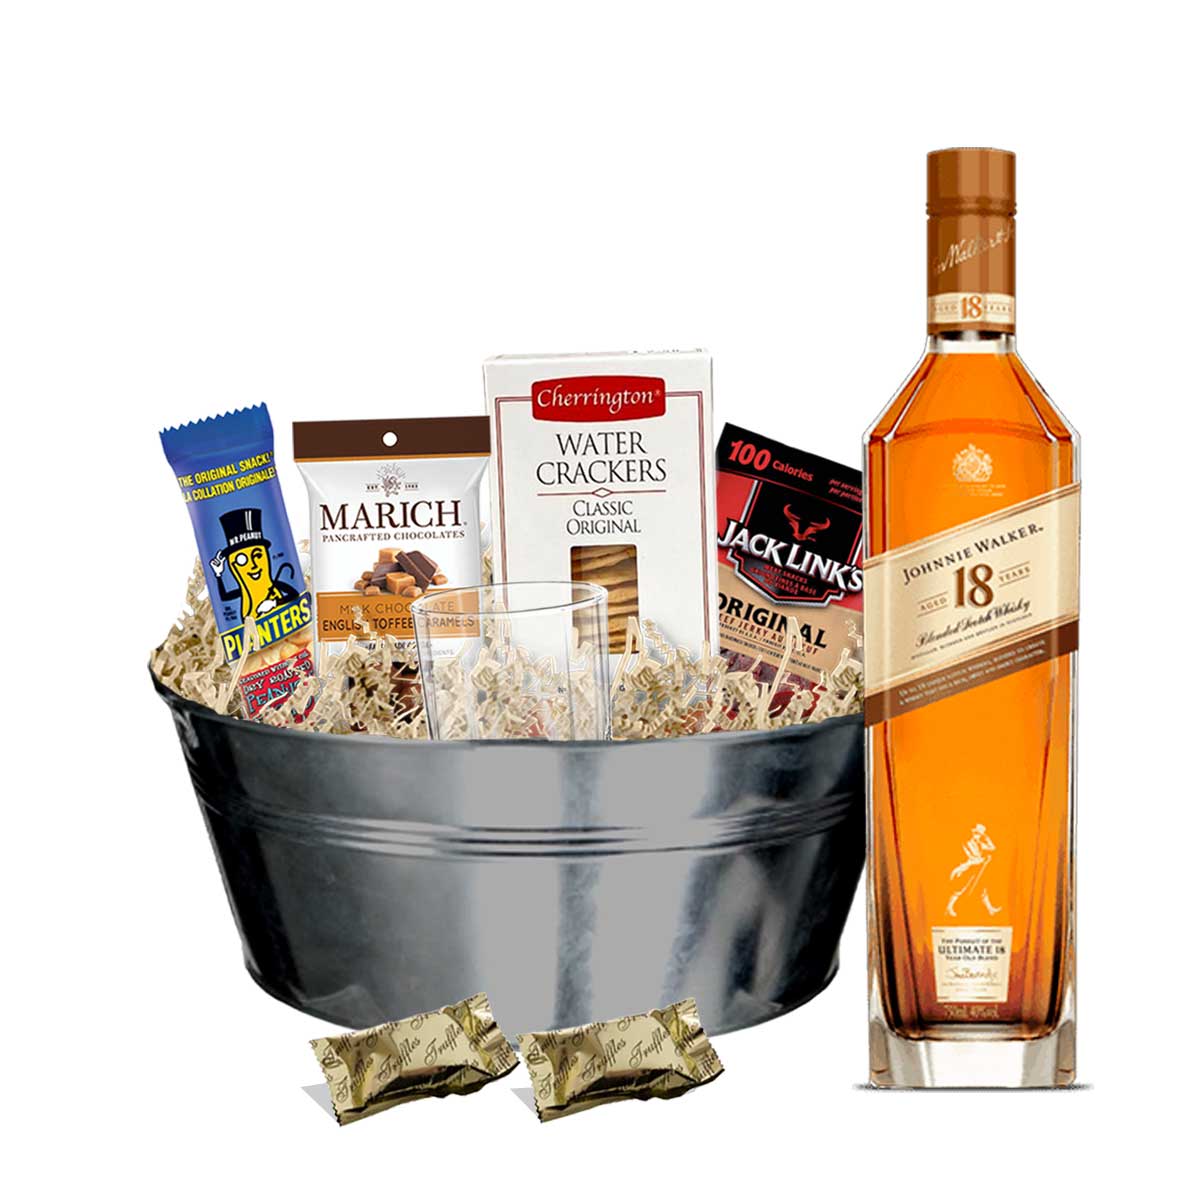 TAG Liquor Stores BC - Johnnie Walker 18 Year Old Scotch Whisky 750ml Gift Basket